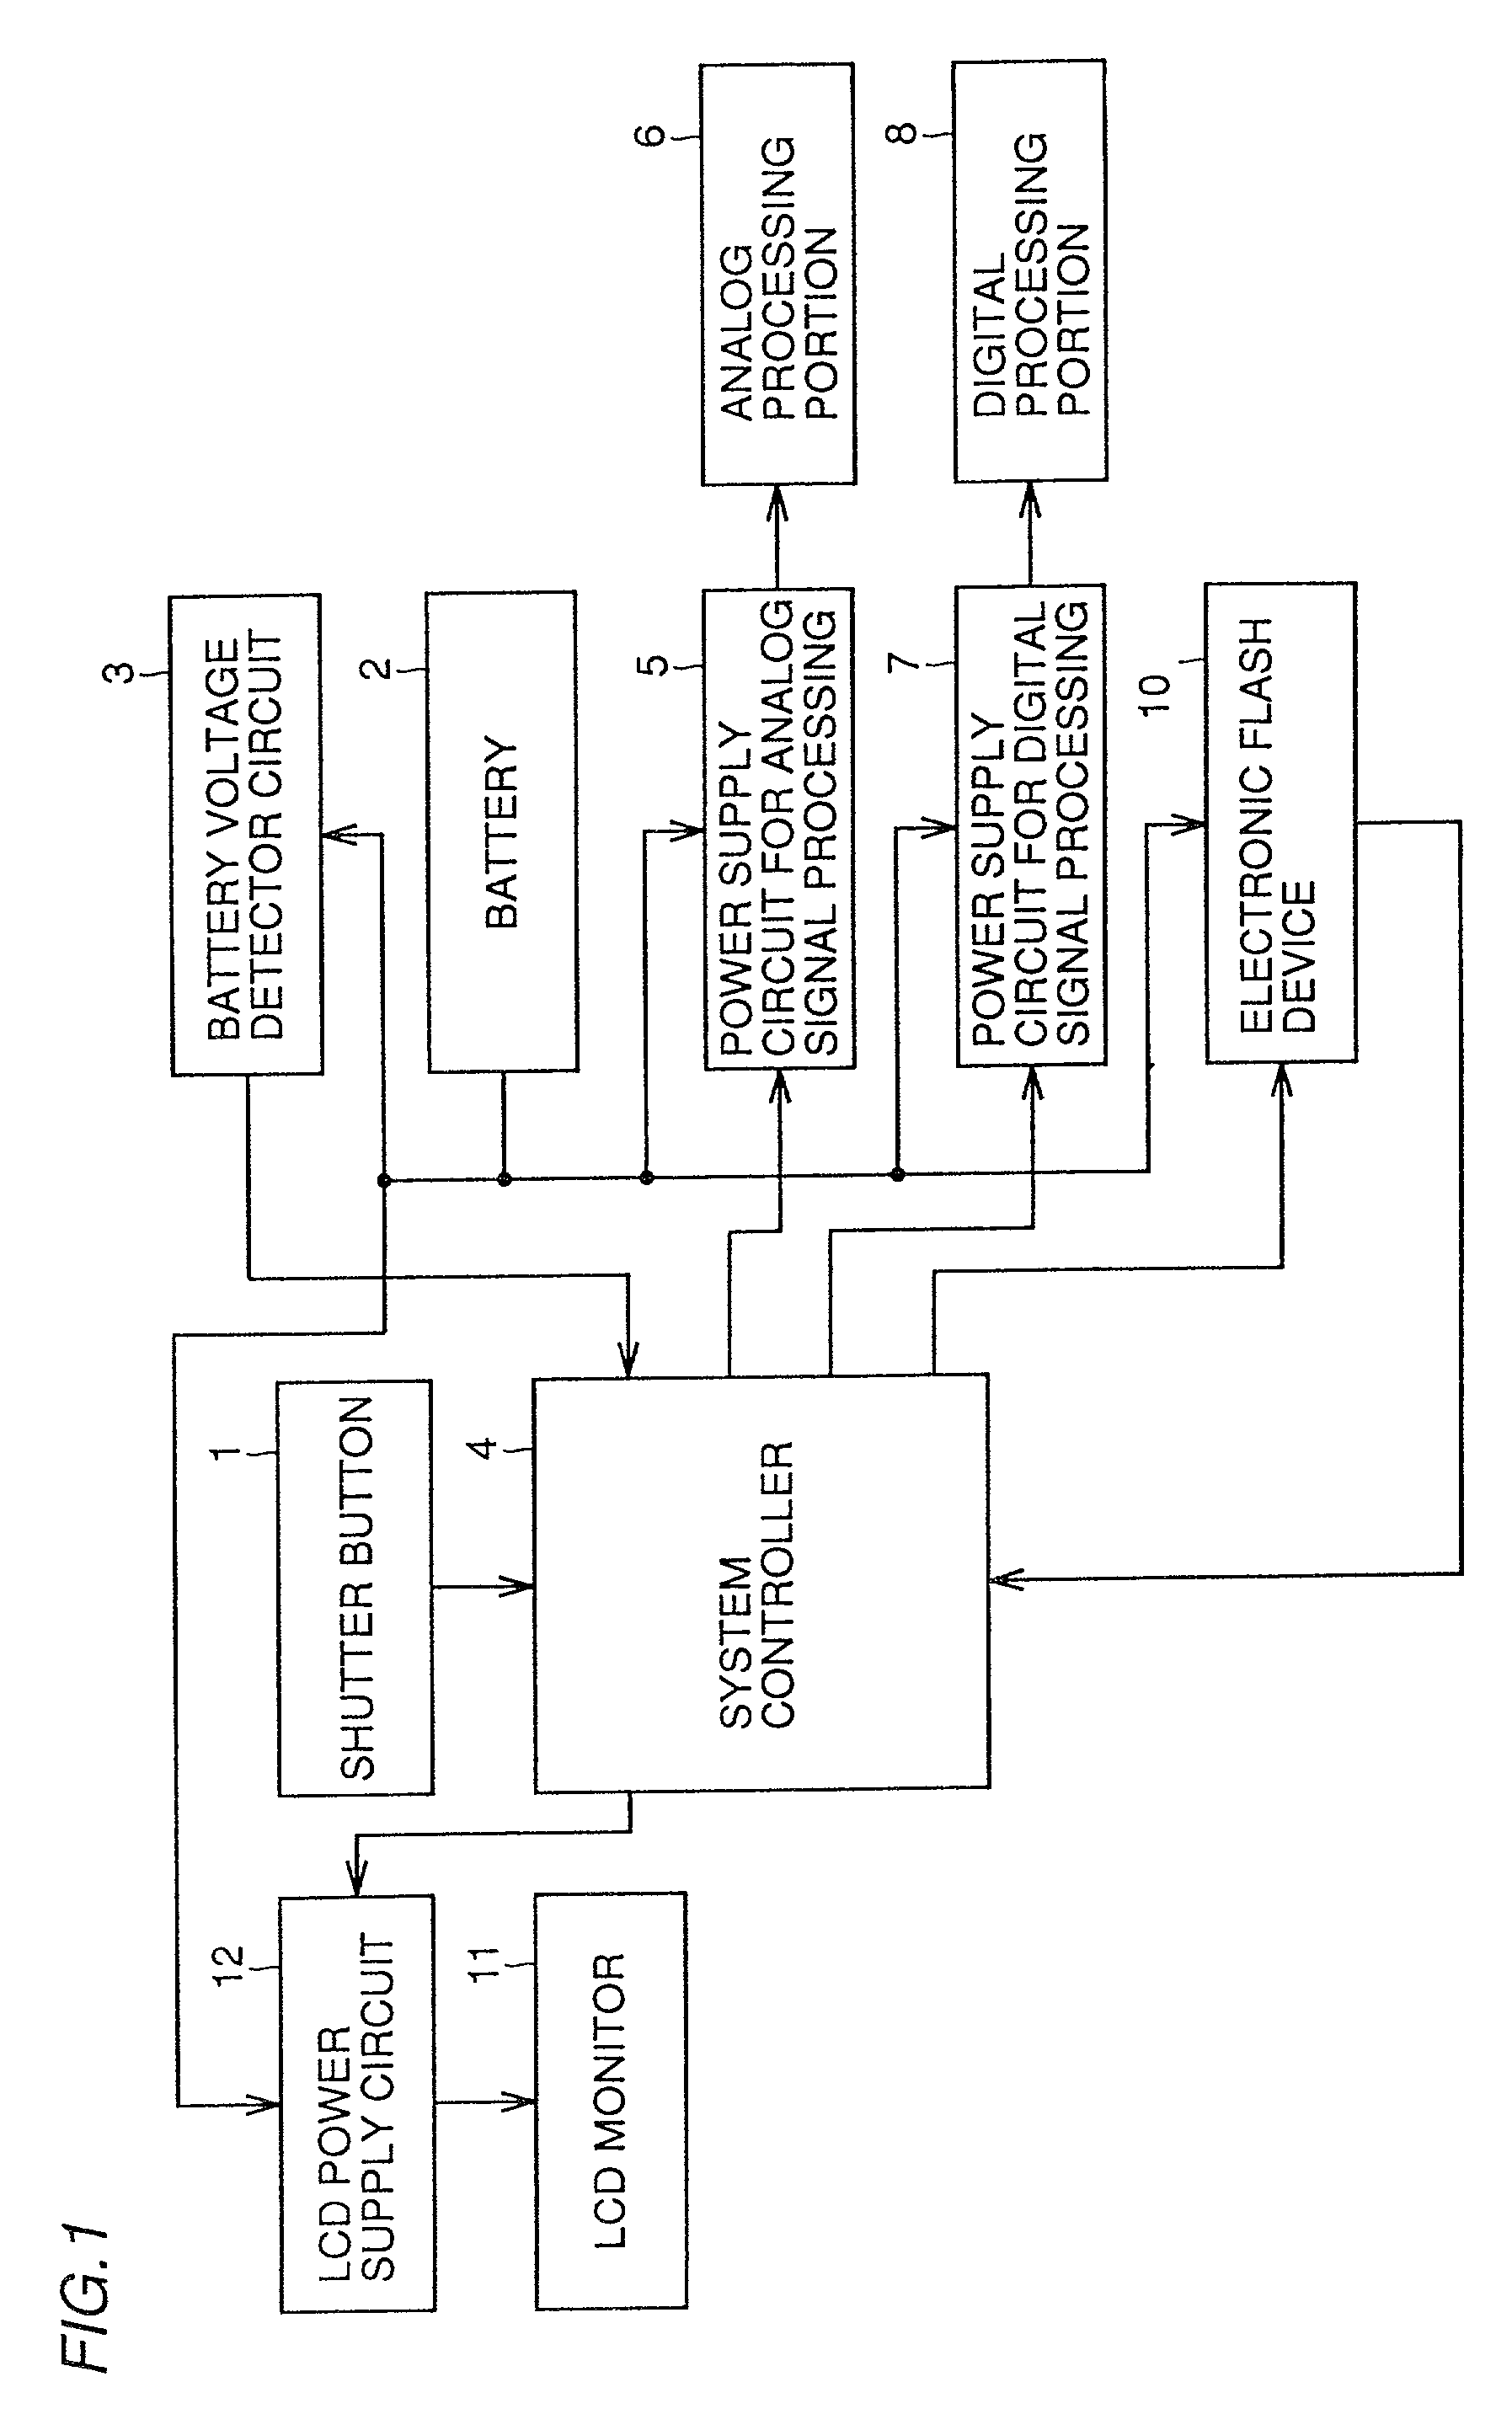 Electronic camera and battery voltage controlling method employed therein for successively, rather than simultaneously, operating camera portions during conditions of low battery voltage